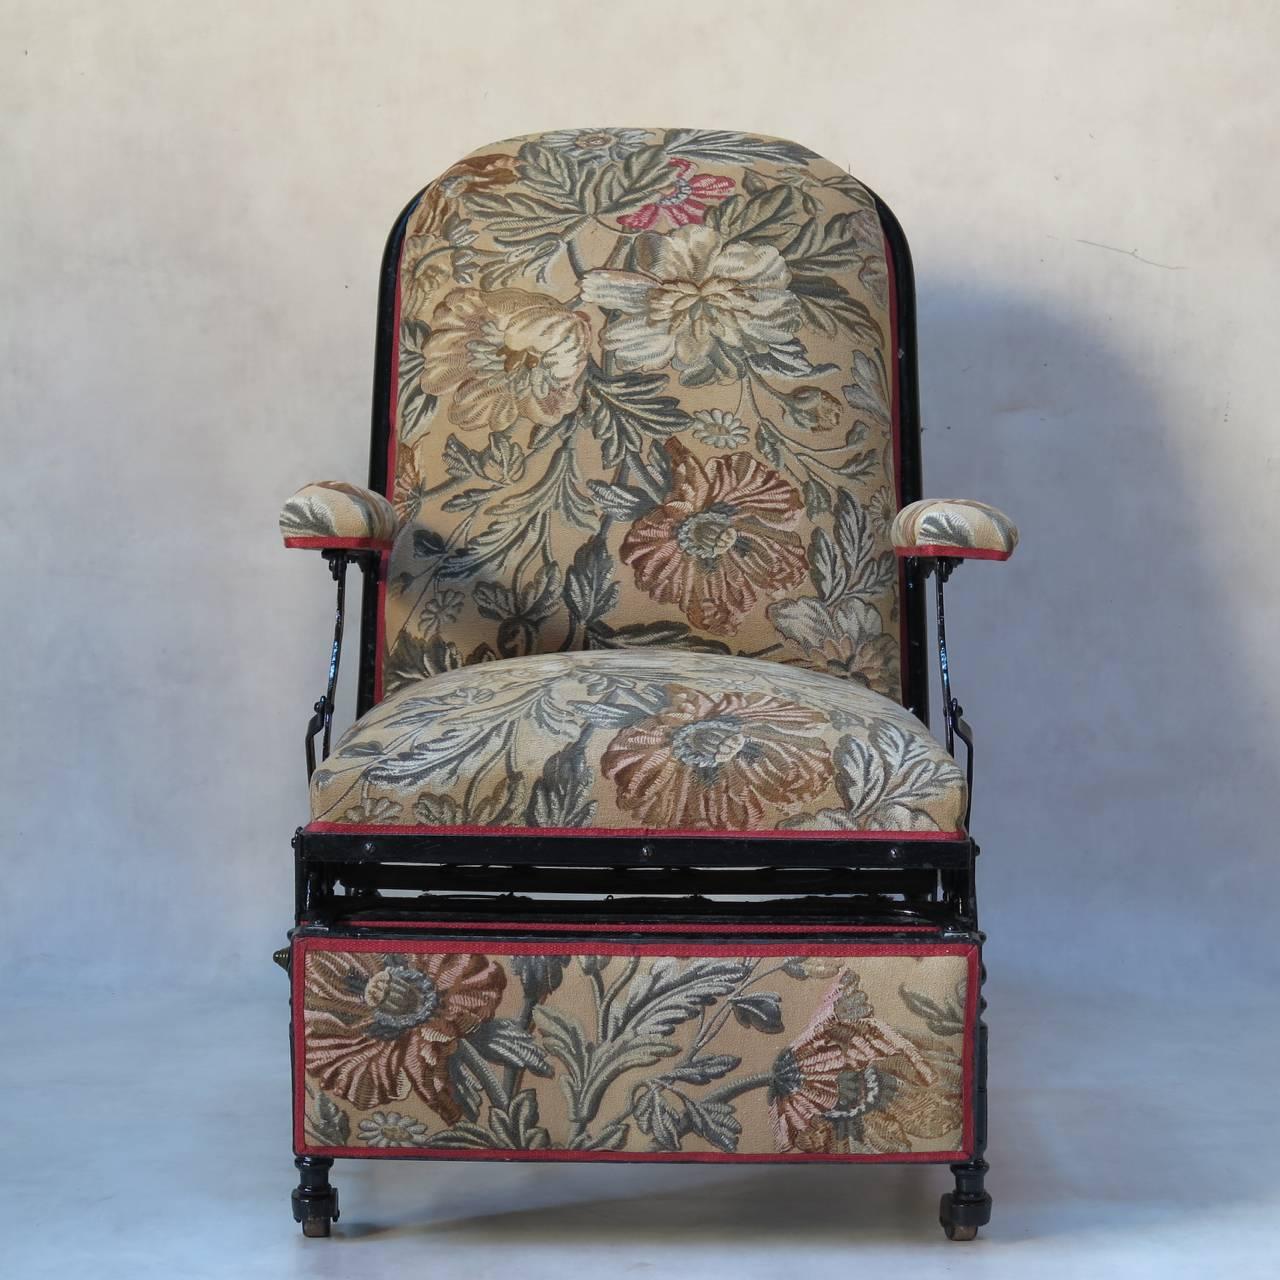 1880s chair